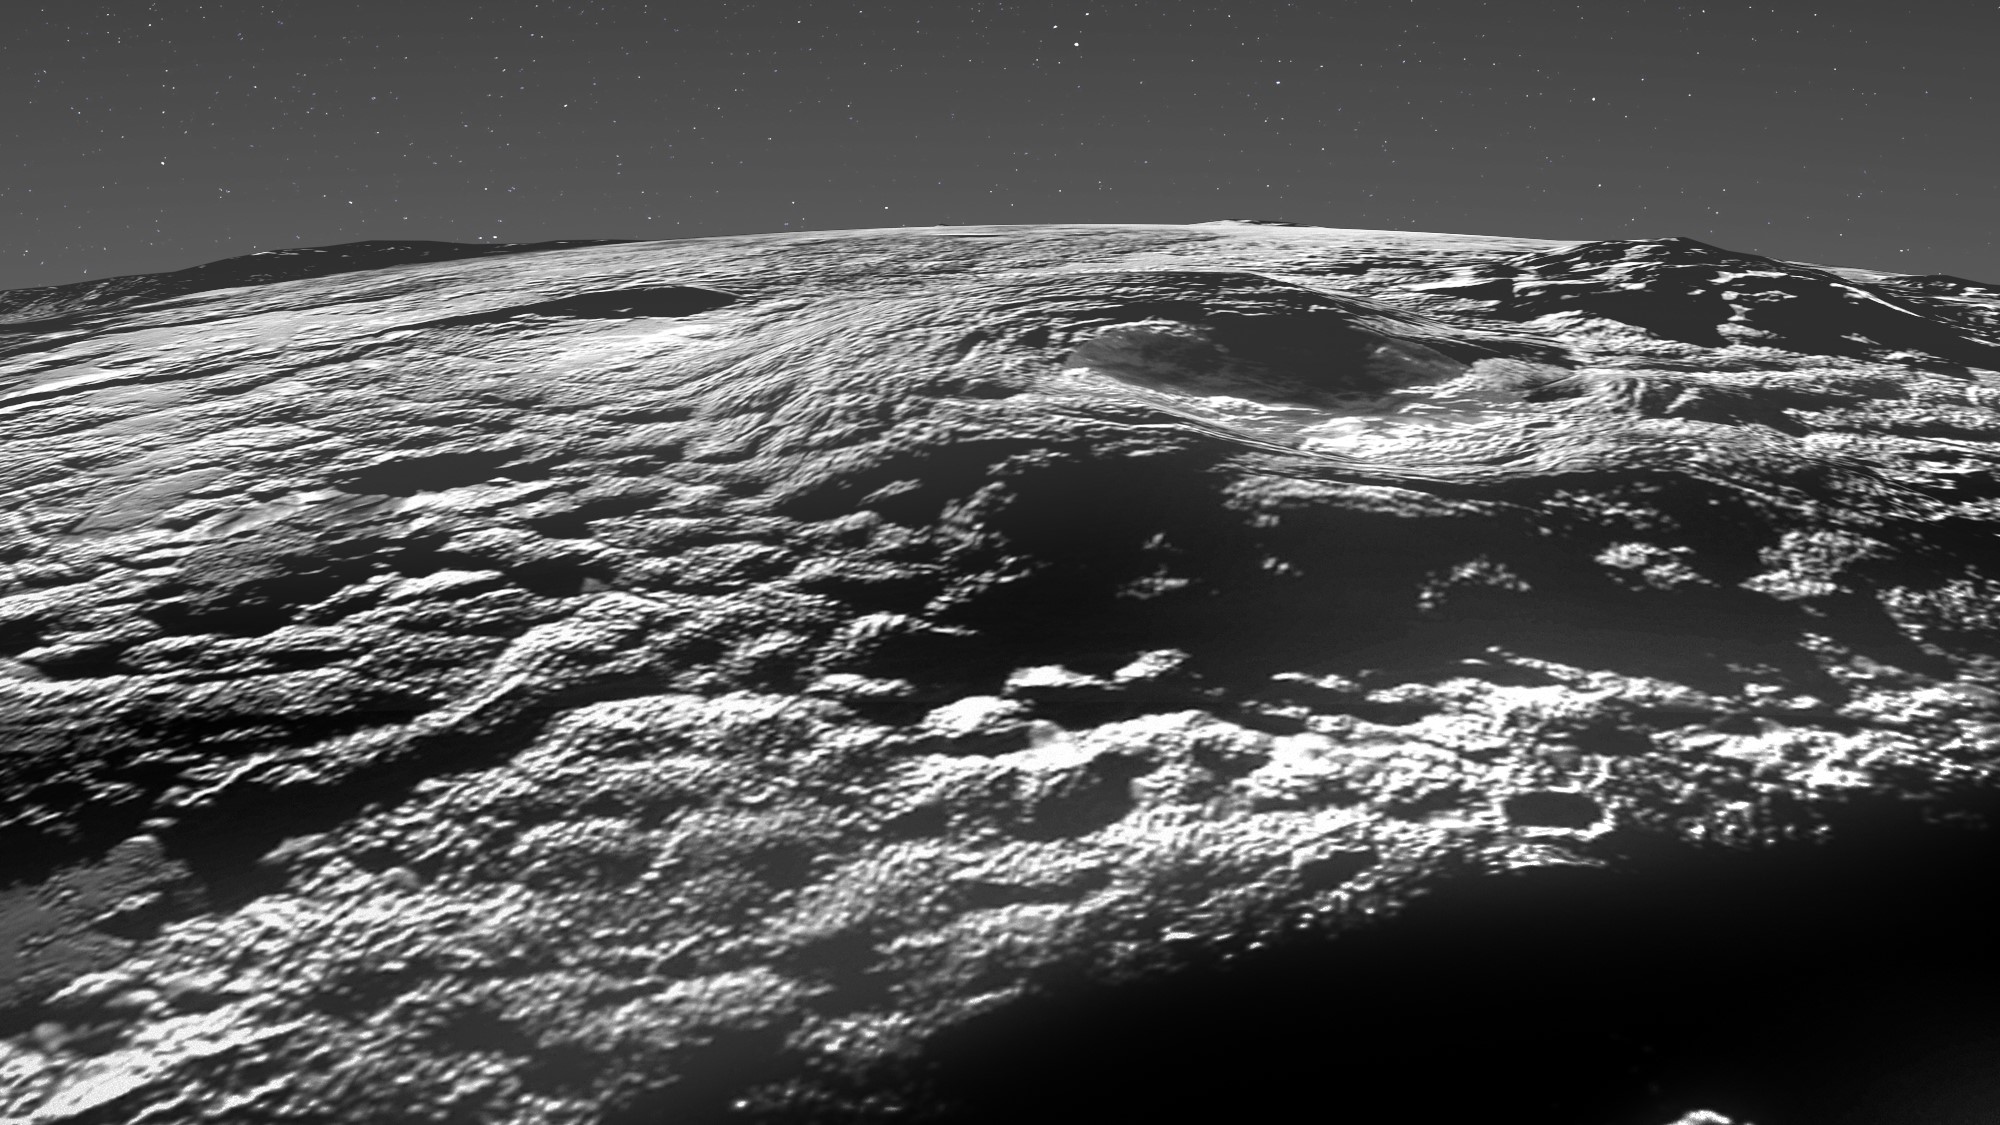 A view of an icy volcanic region on Pluto.